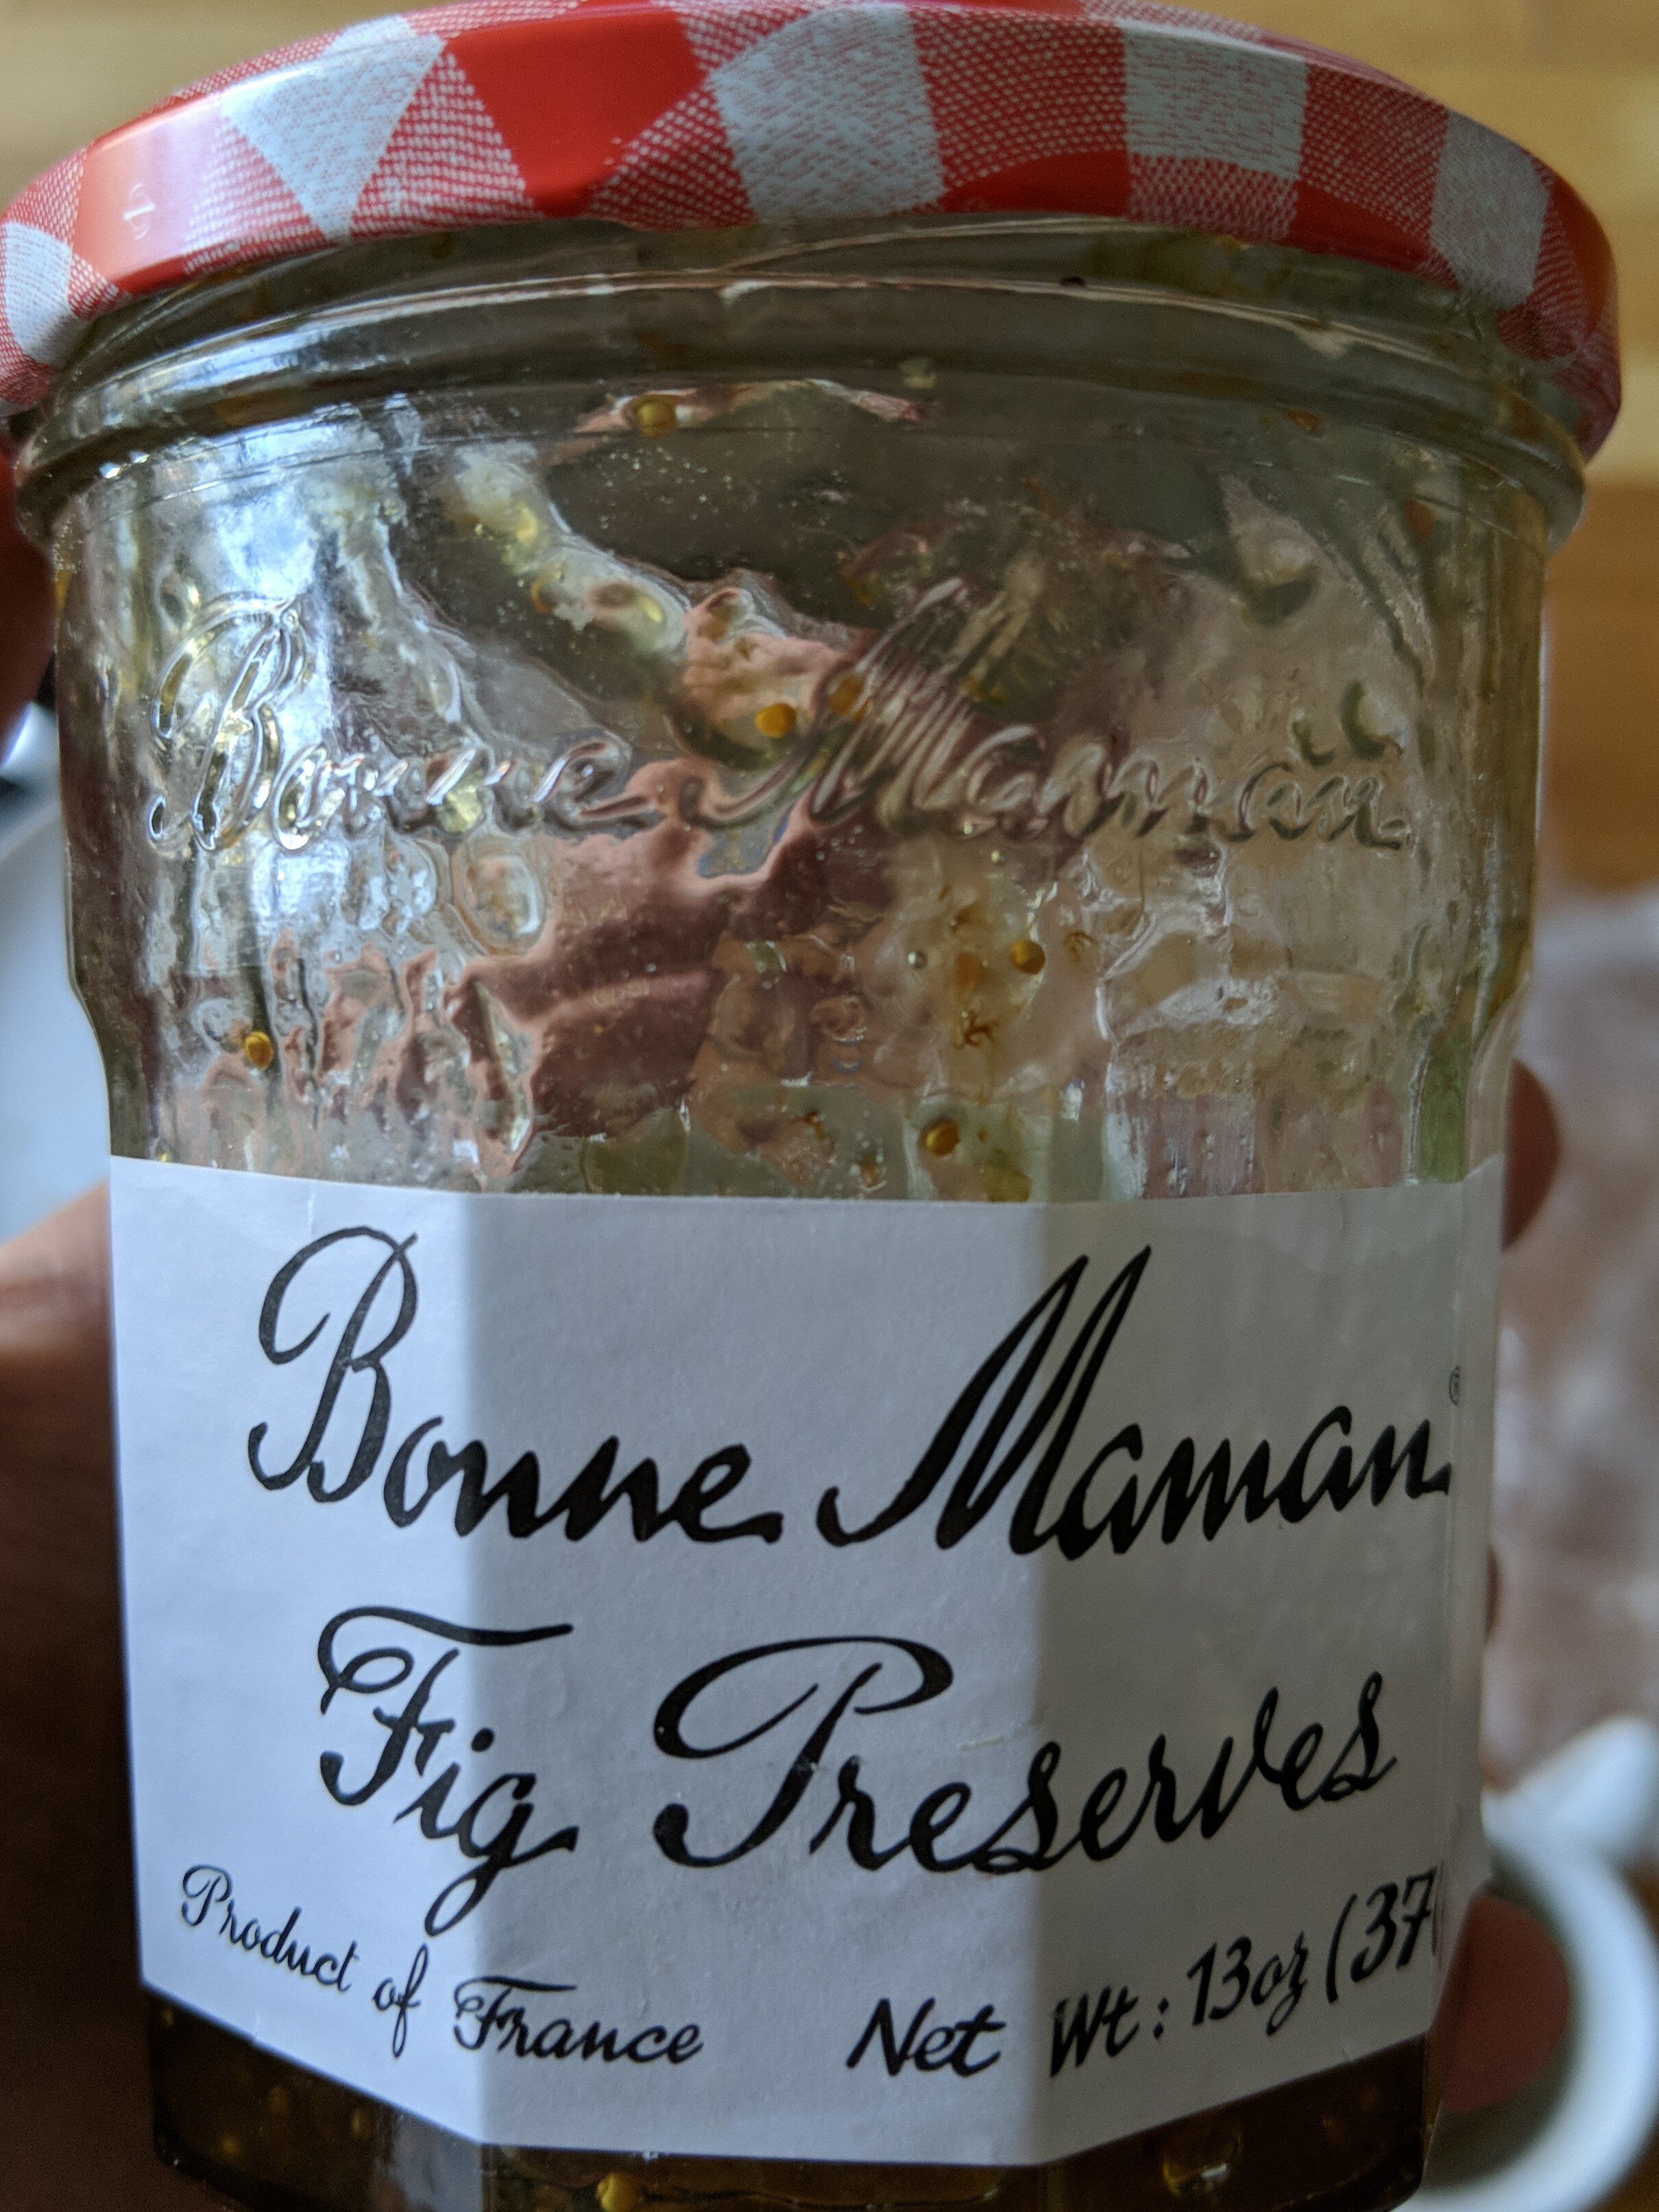 Bonne Maman - French Fig Preserve, 13oz (370g) - Product